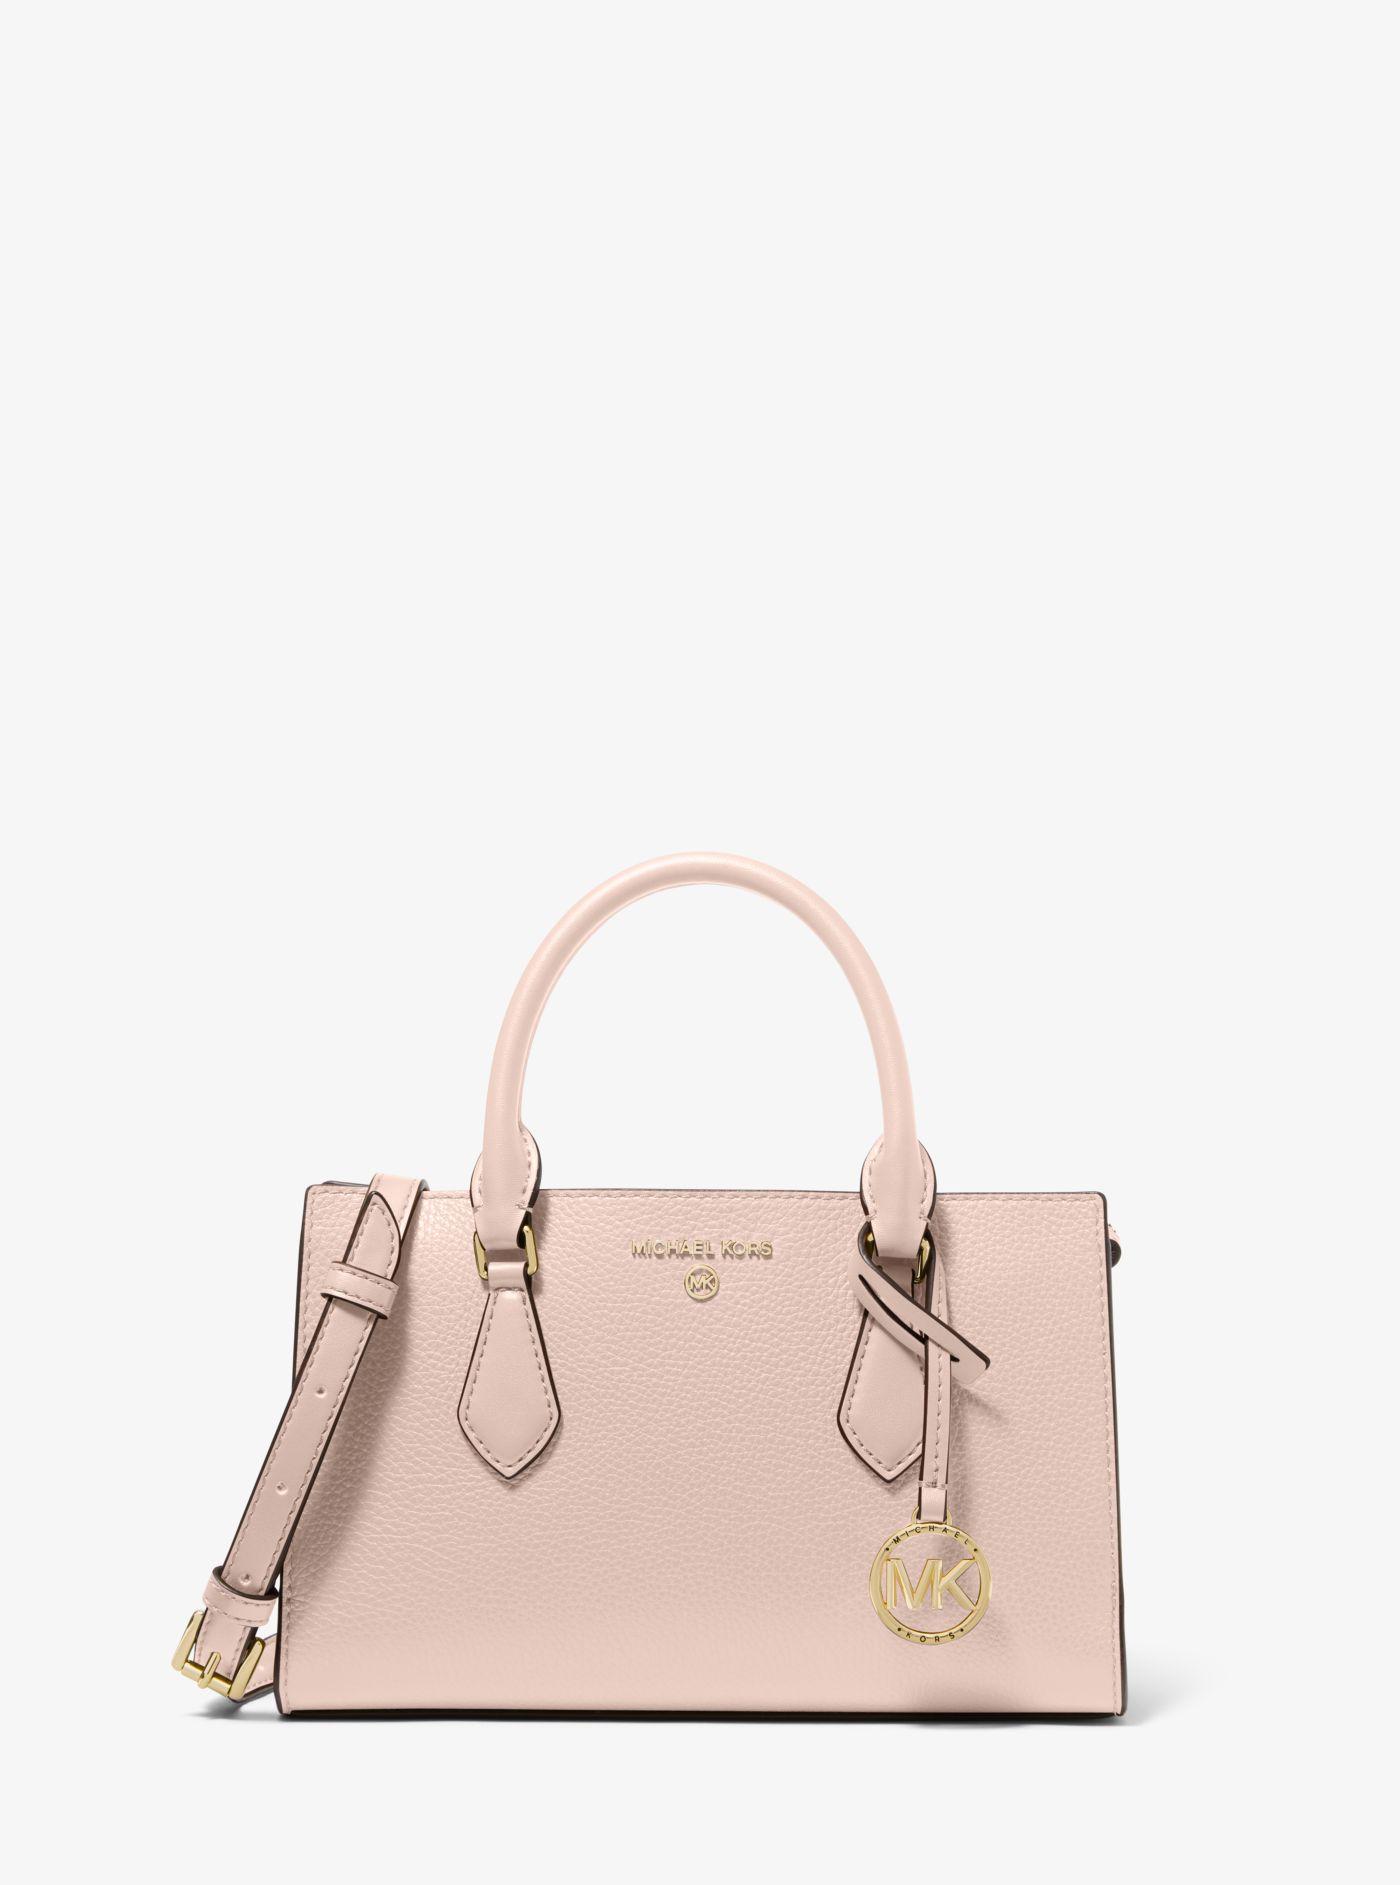 Michael Kors Valerie Small Pebbled Leather Satchel in Pink | Lyst